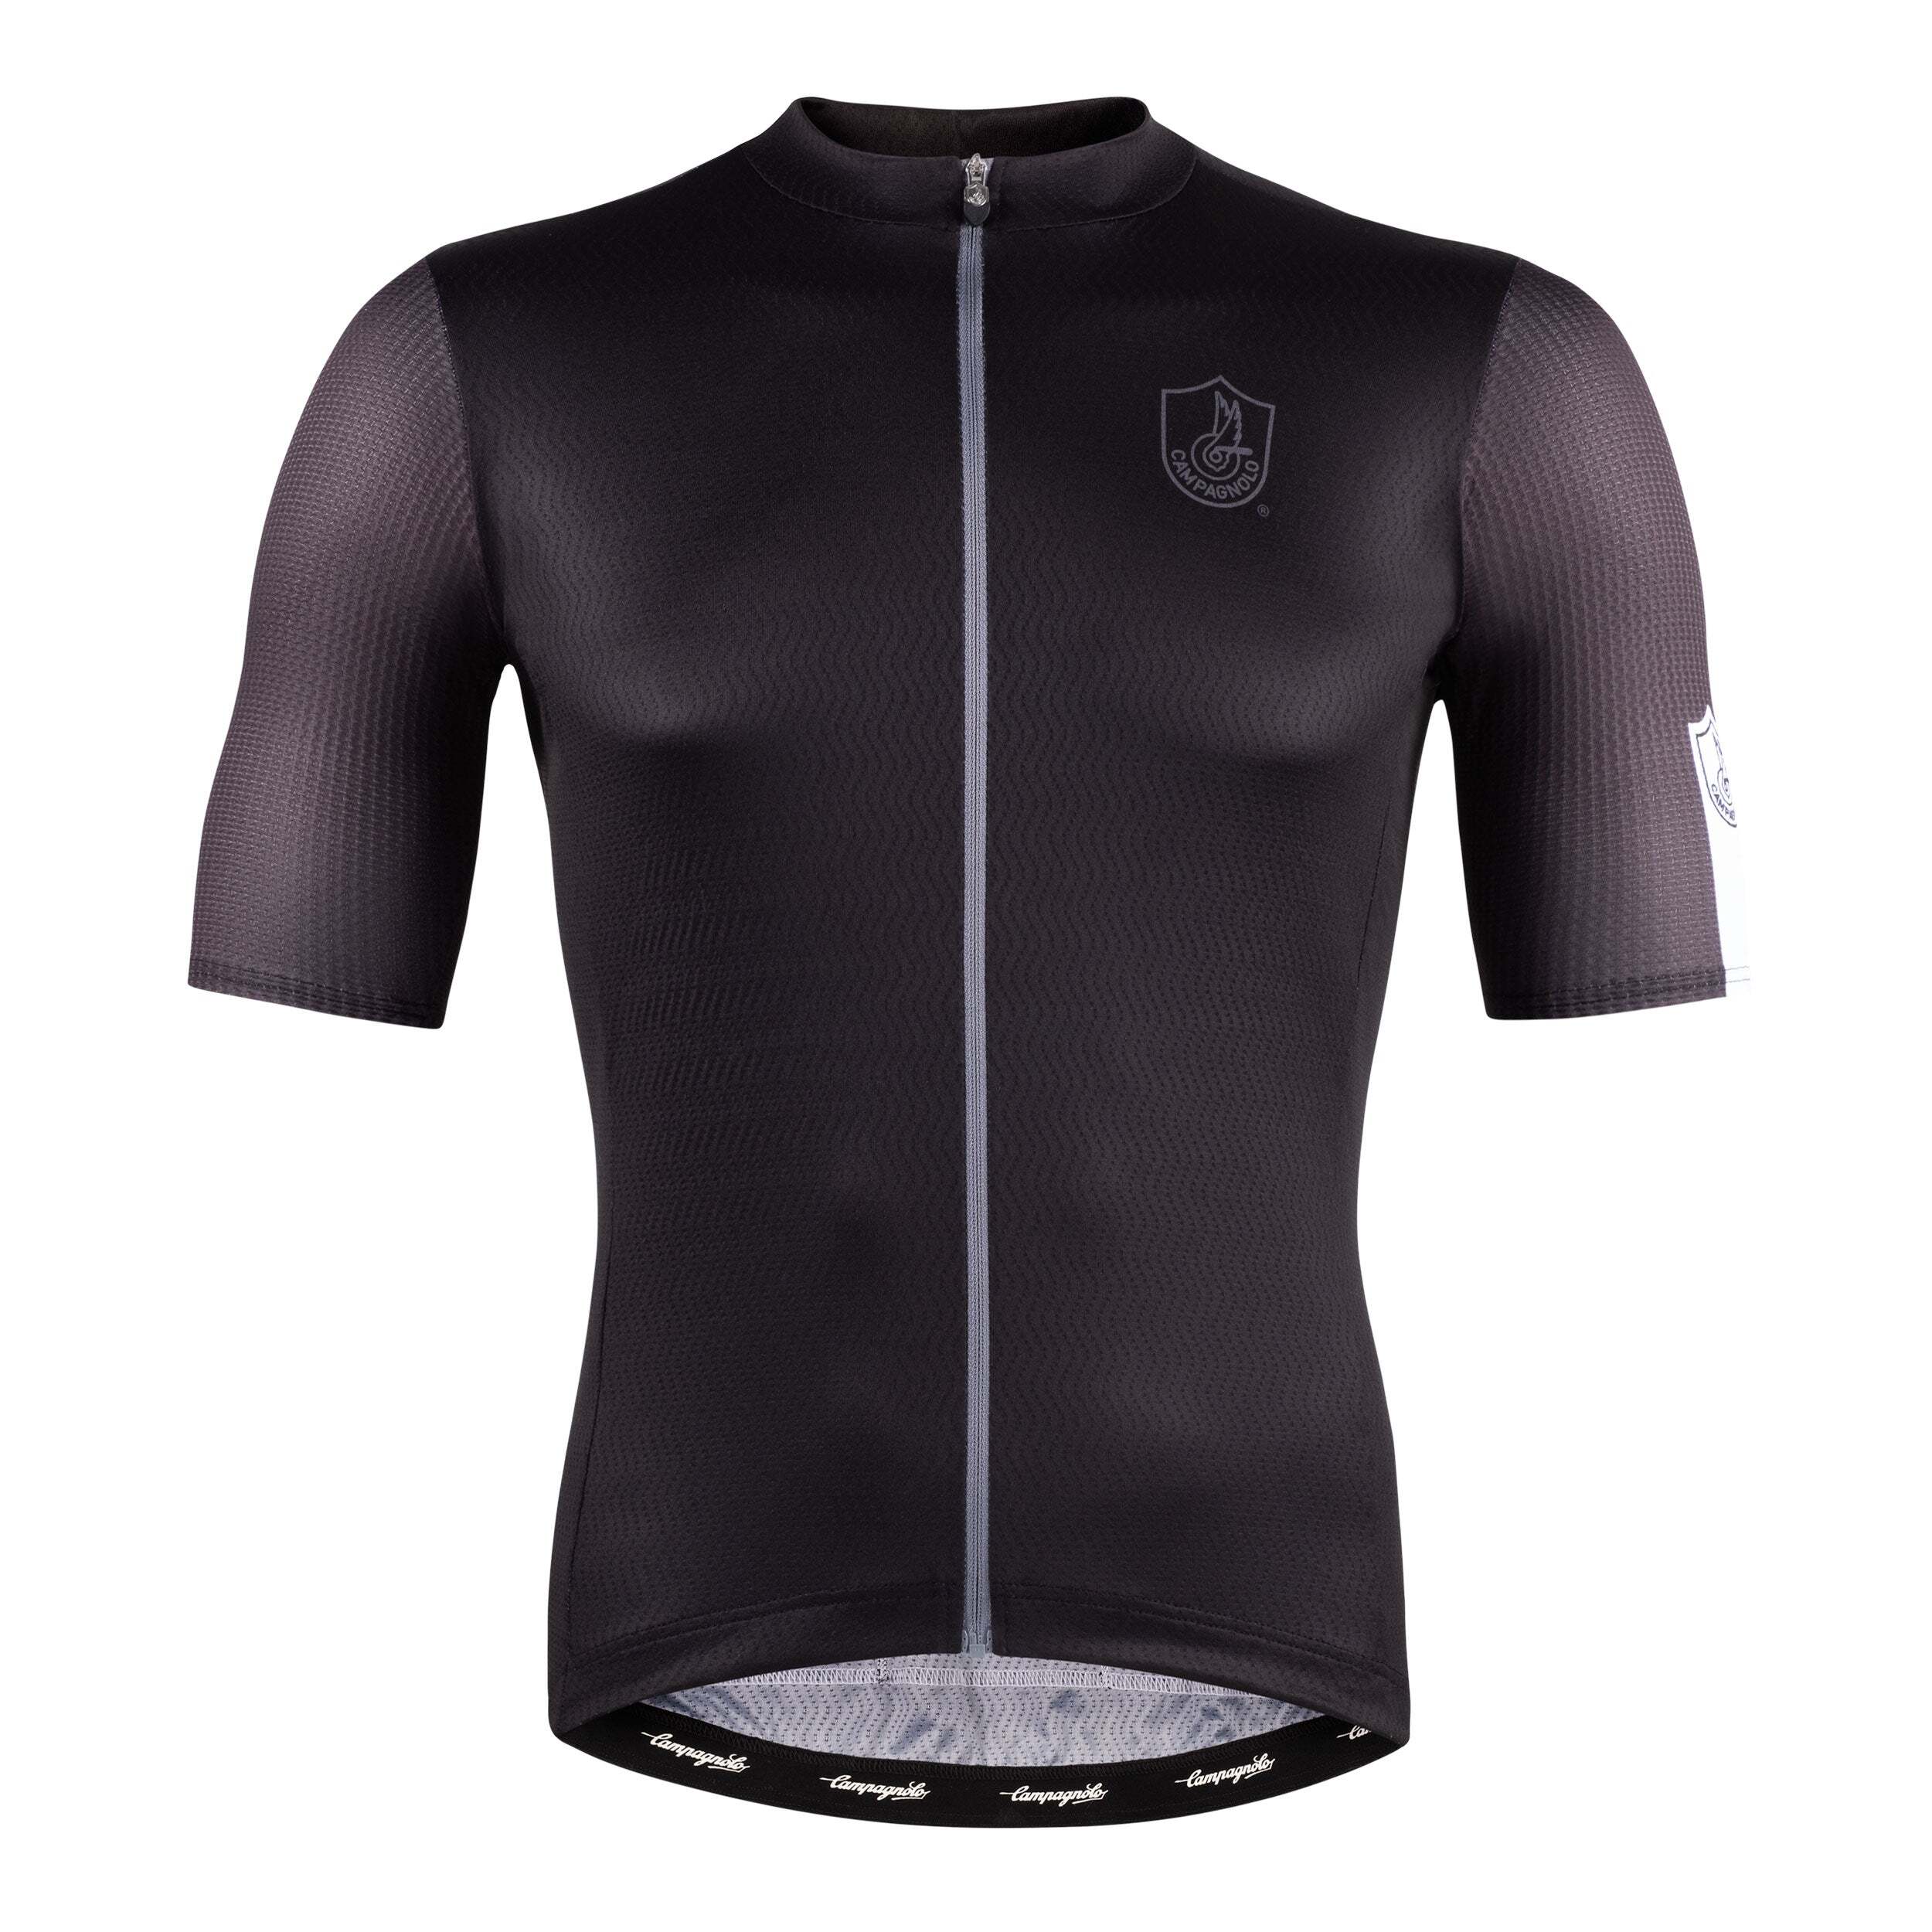 Occhio Men’s Indio Jersey | Features a fast-wicking polyester body and breathable mesh sleeves to keep the ideal body temperature | Big variety designs and colours to choose from.